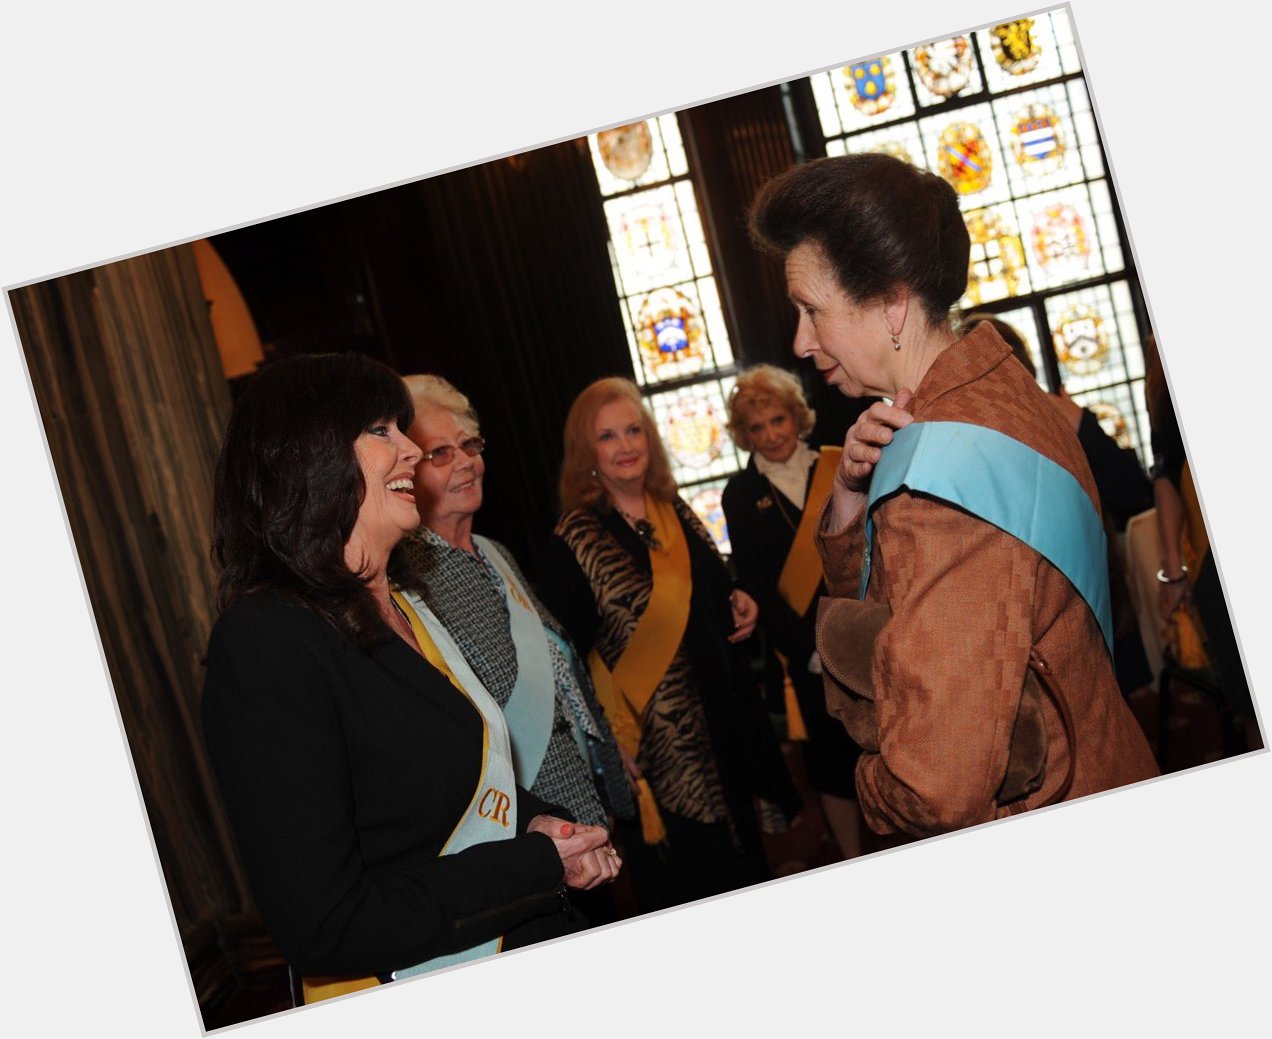 Wishing Companion Ratling, HRH The Princess Anne a very Happy Birthday today. Pictured at  